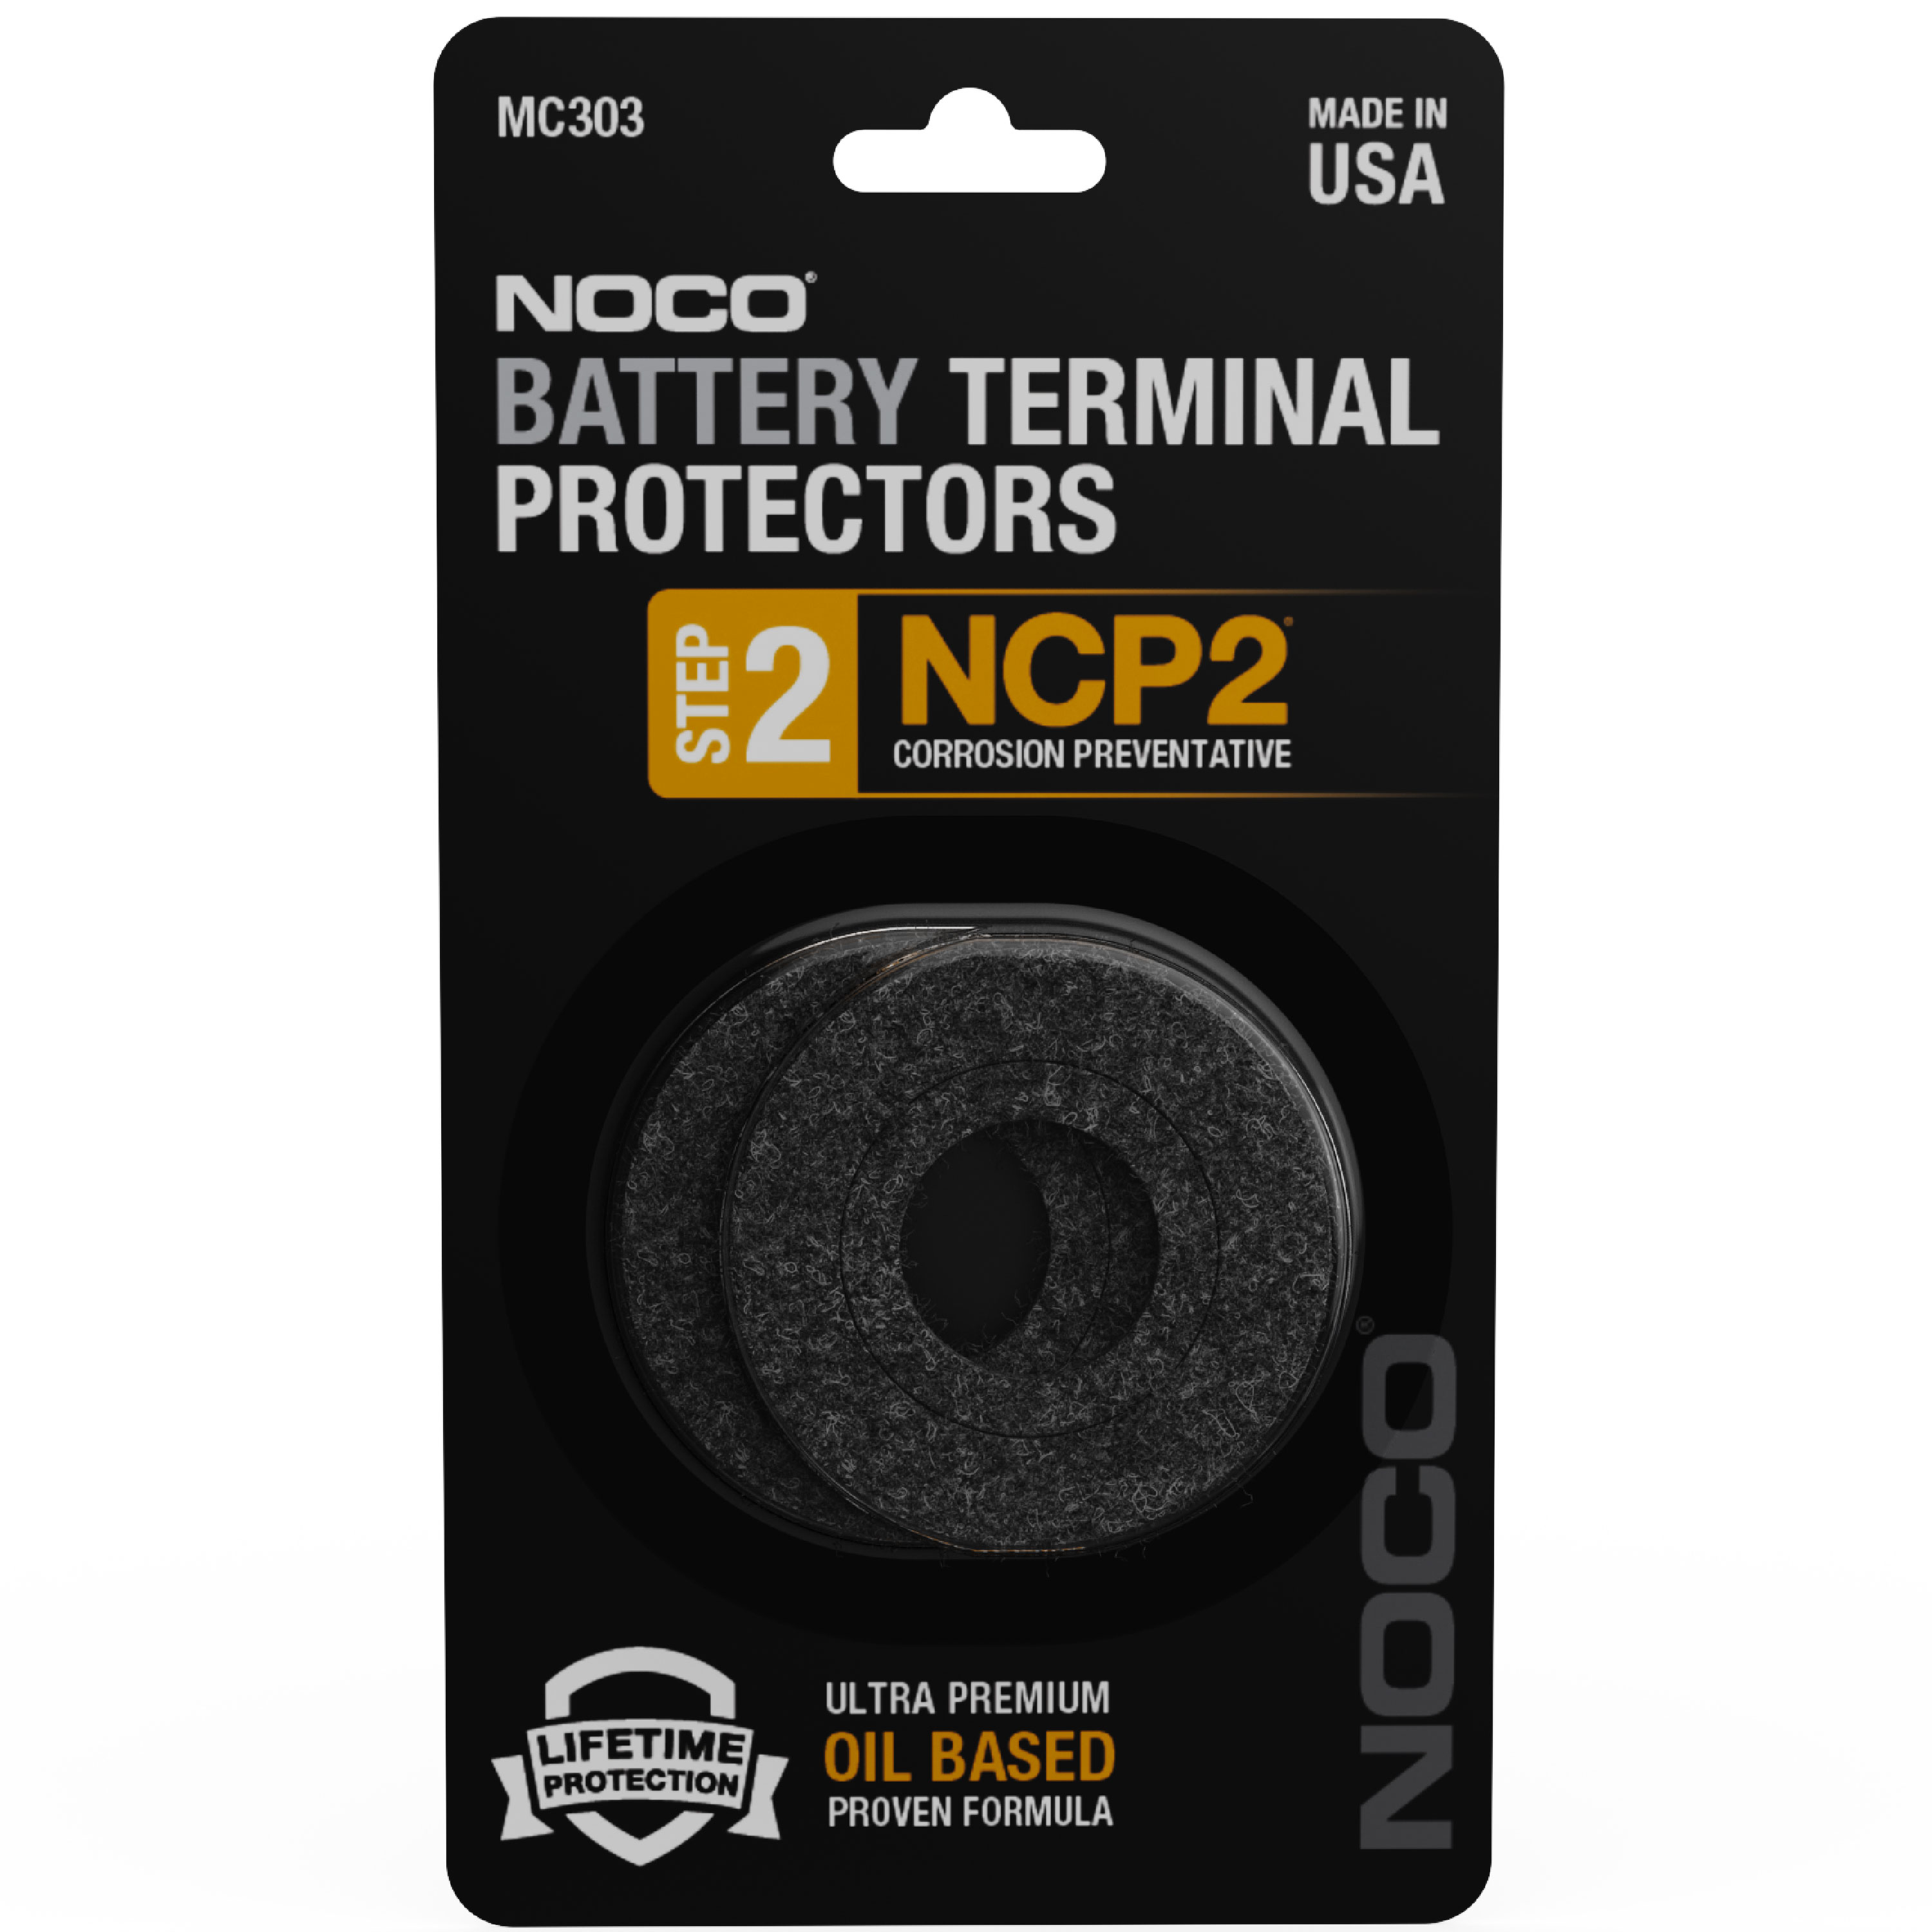 NOCO NCP2 MC303 Oil-Based Battery Terminal Protectors (Pack of 2) - image 1 of 6